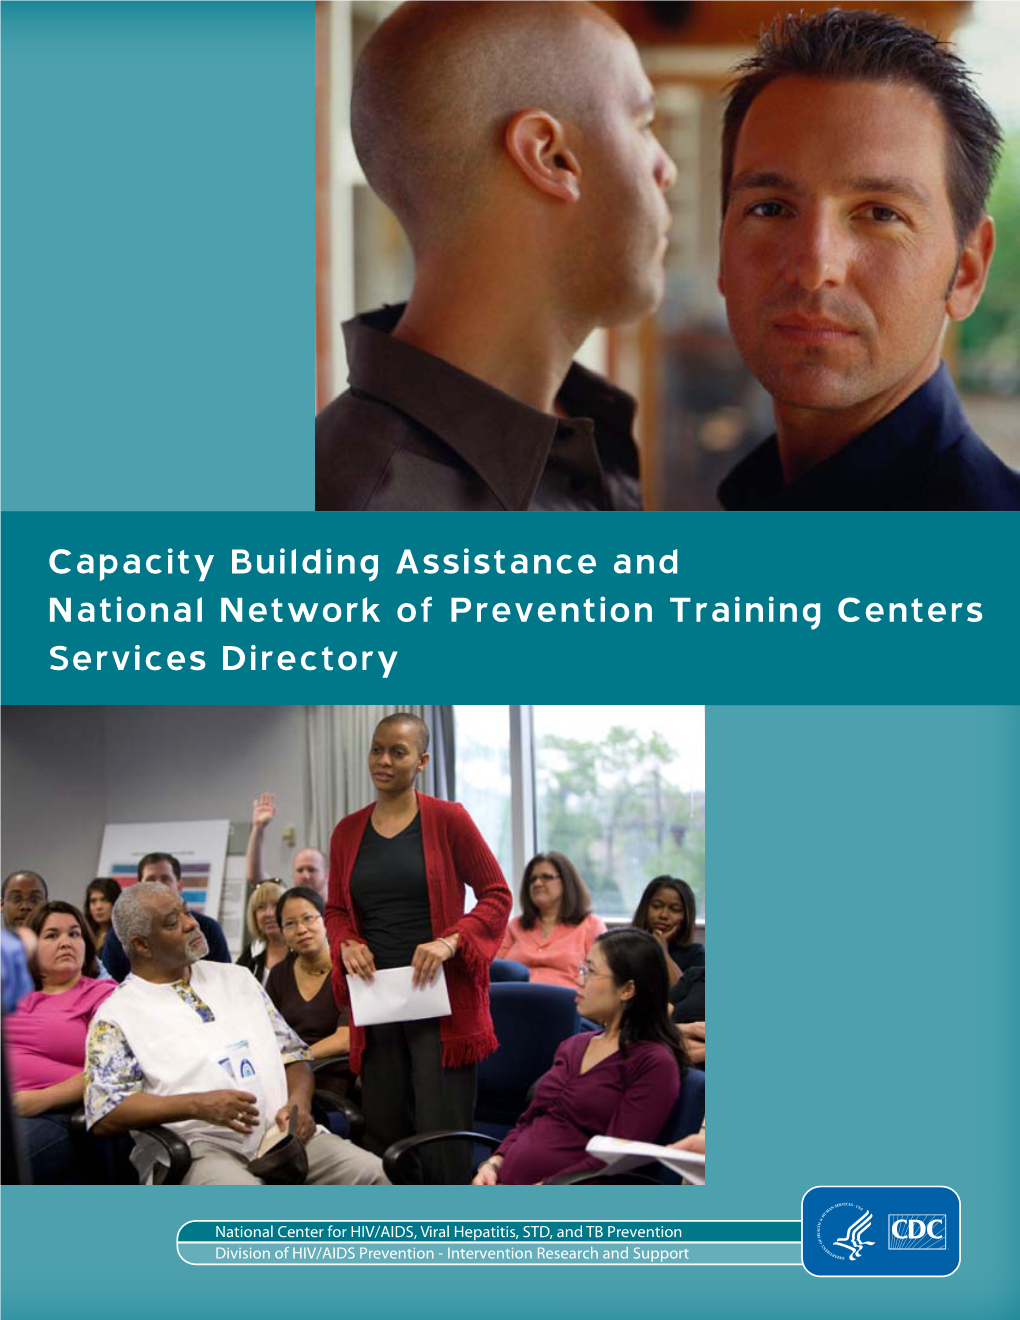 CBA/NNPTC Services Directory and National Network of Preventiontraining Centers Services Contents: Directory of Capacity Building Assistance